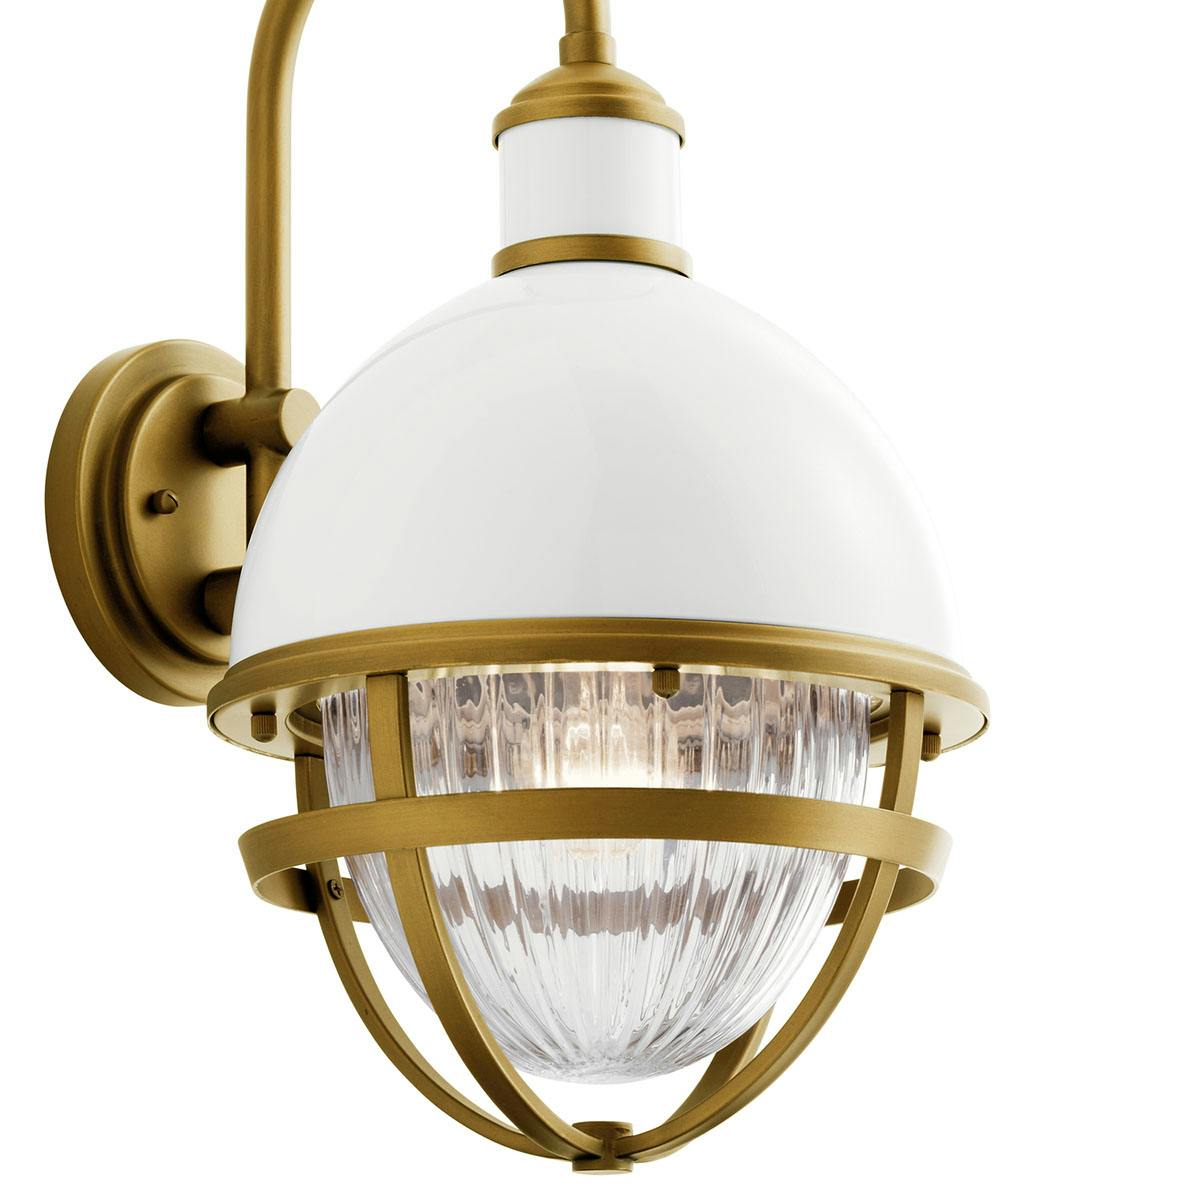 Close up view of the Tollis 18.50" Wall Light White and Brass on a white background